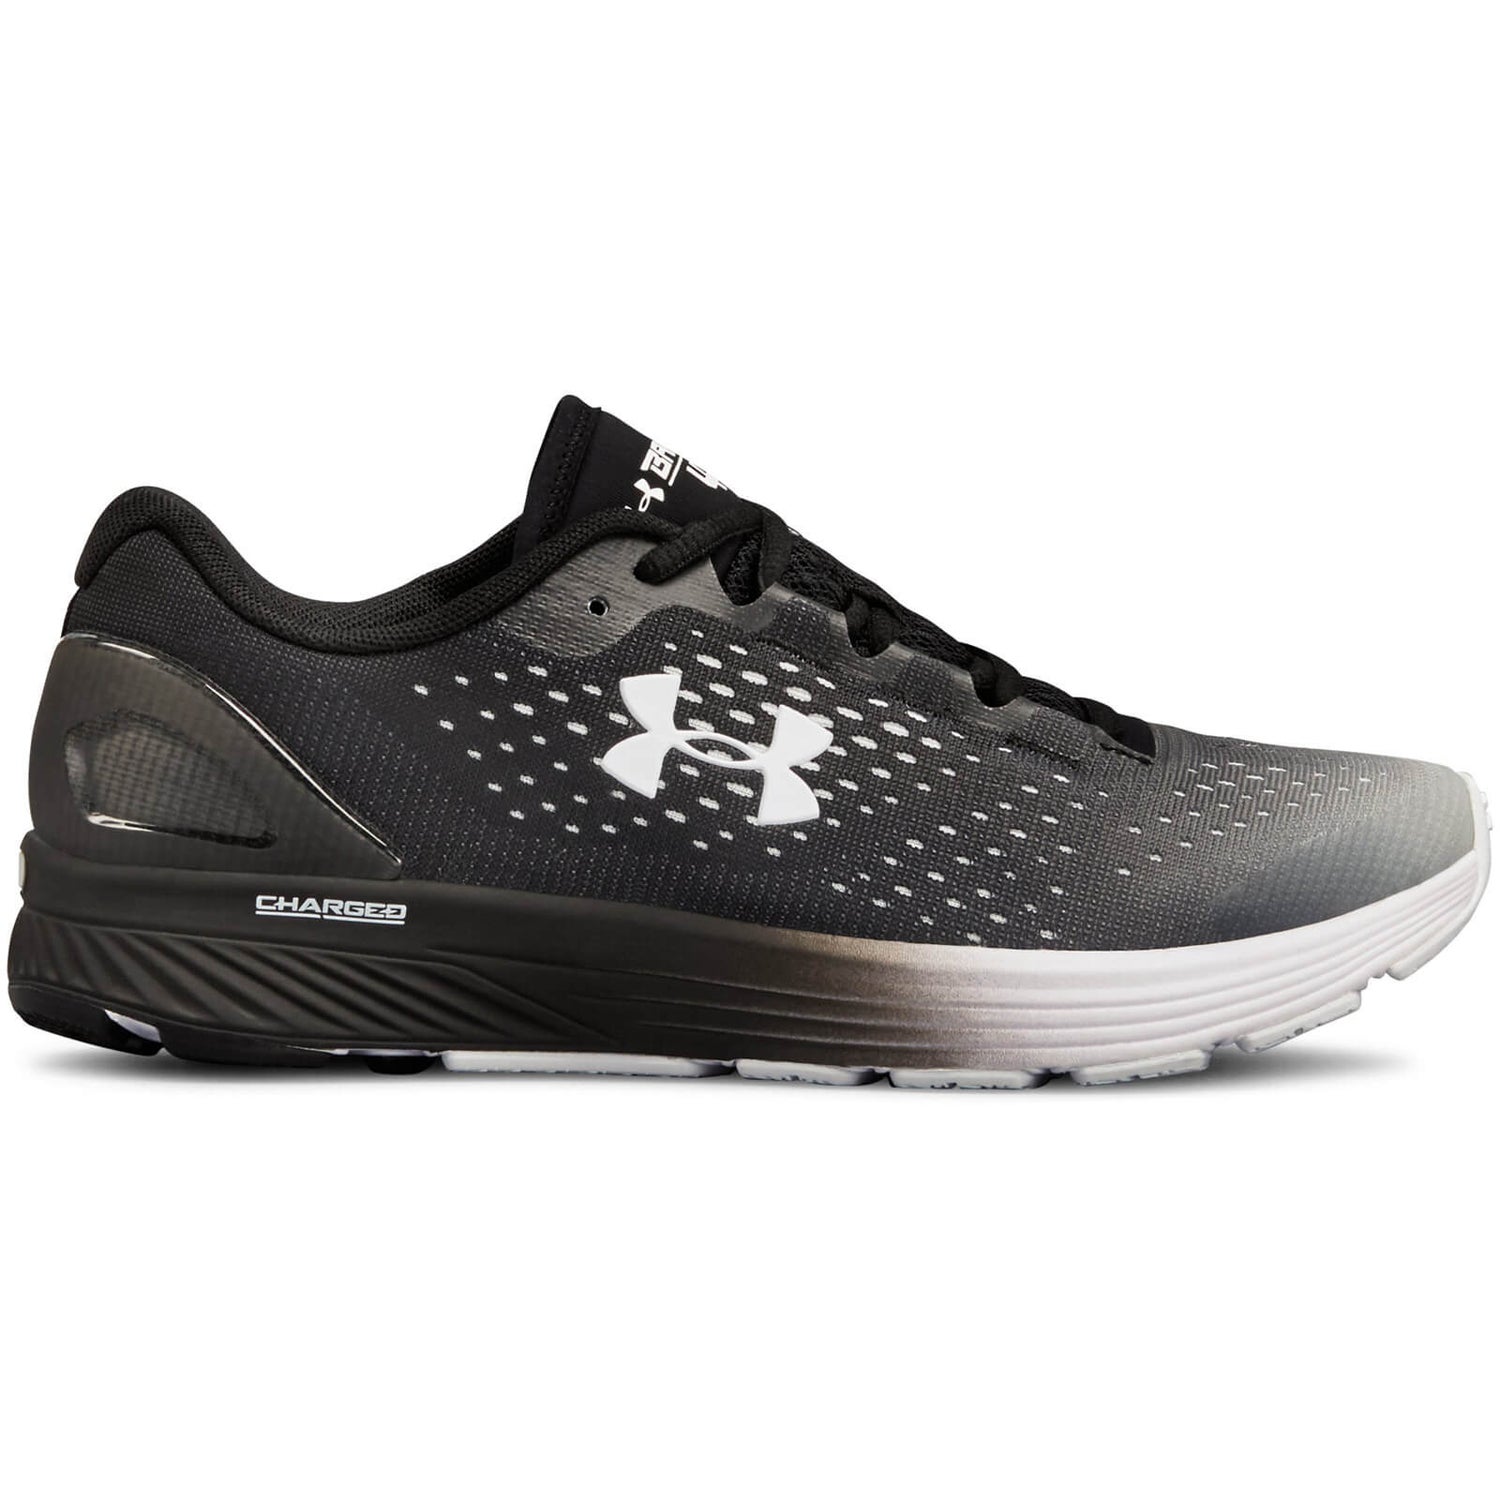 Under Armour Charged Bandit Black | lupon.gov.ph